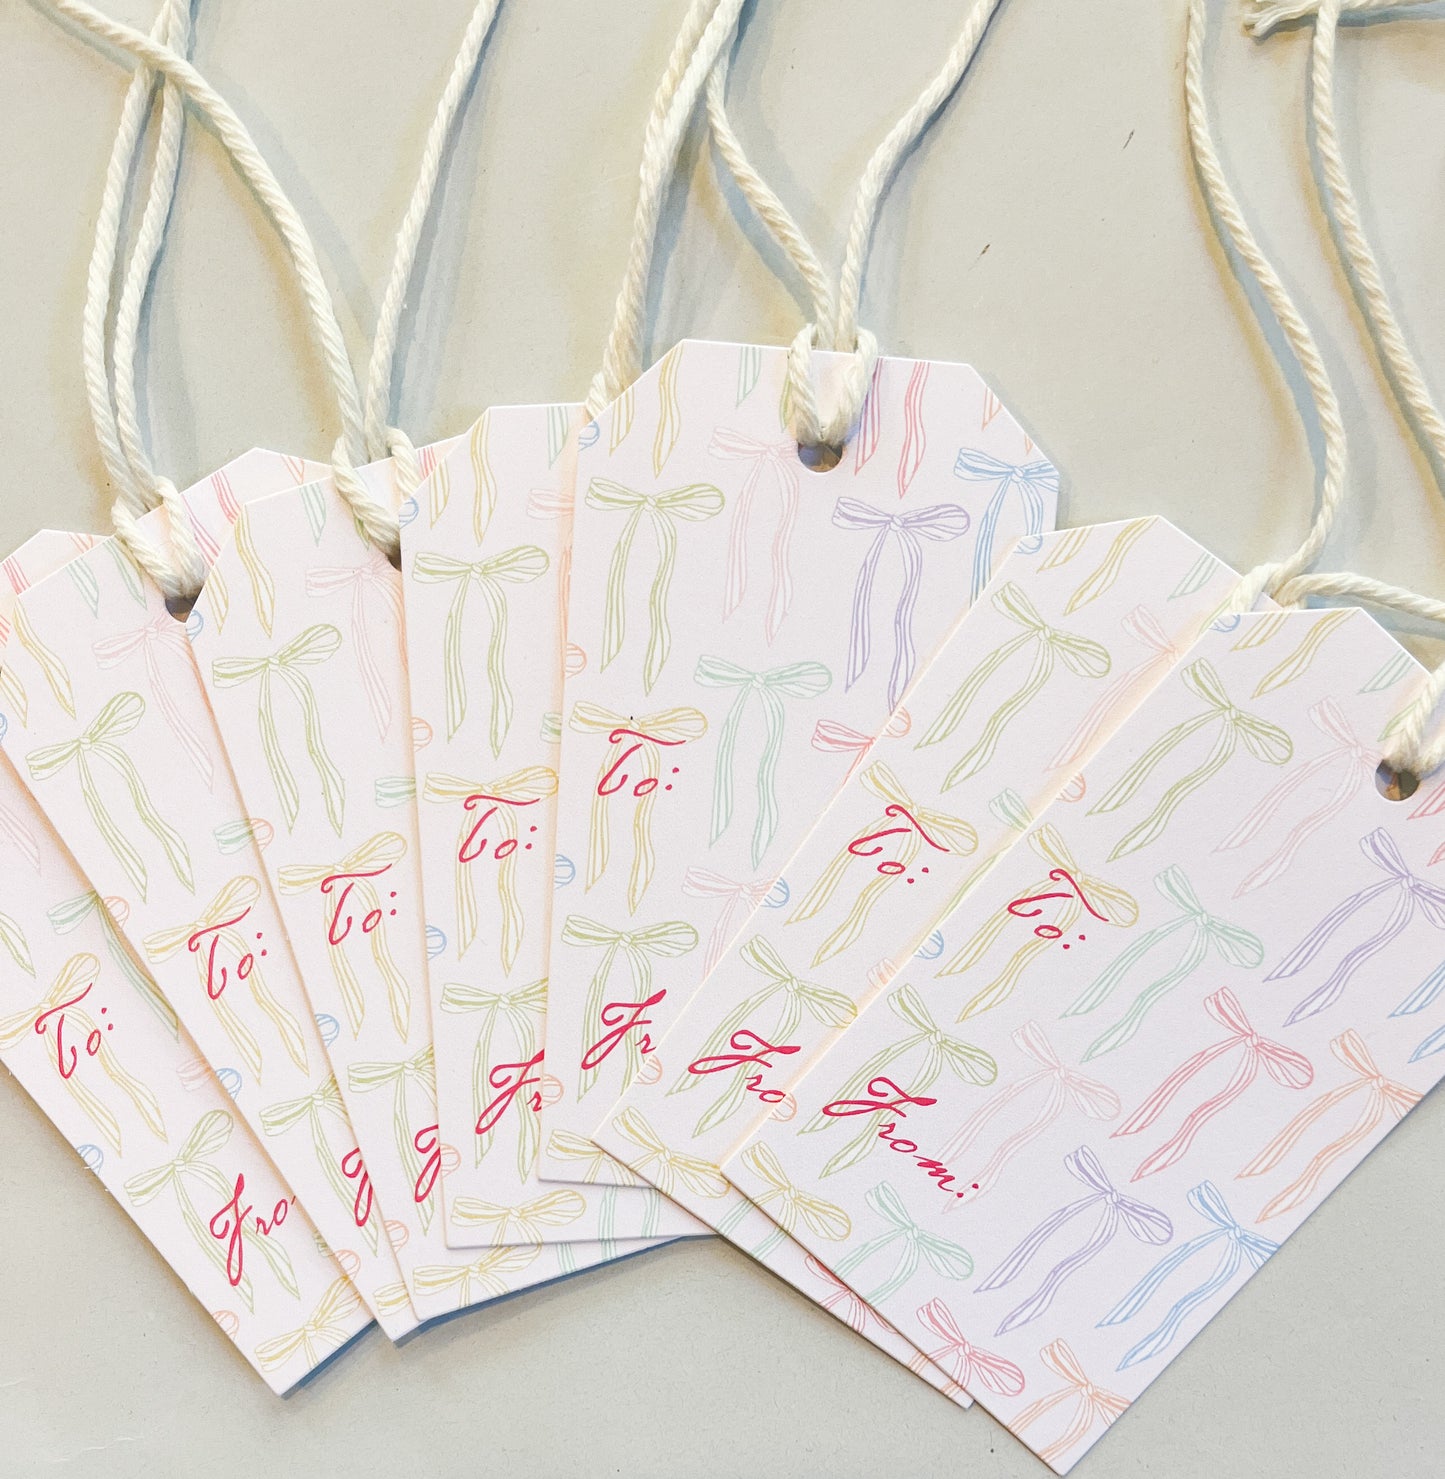 Bow Gift Tags